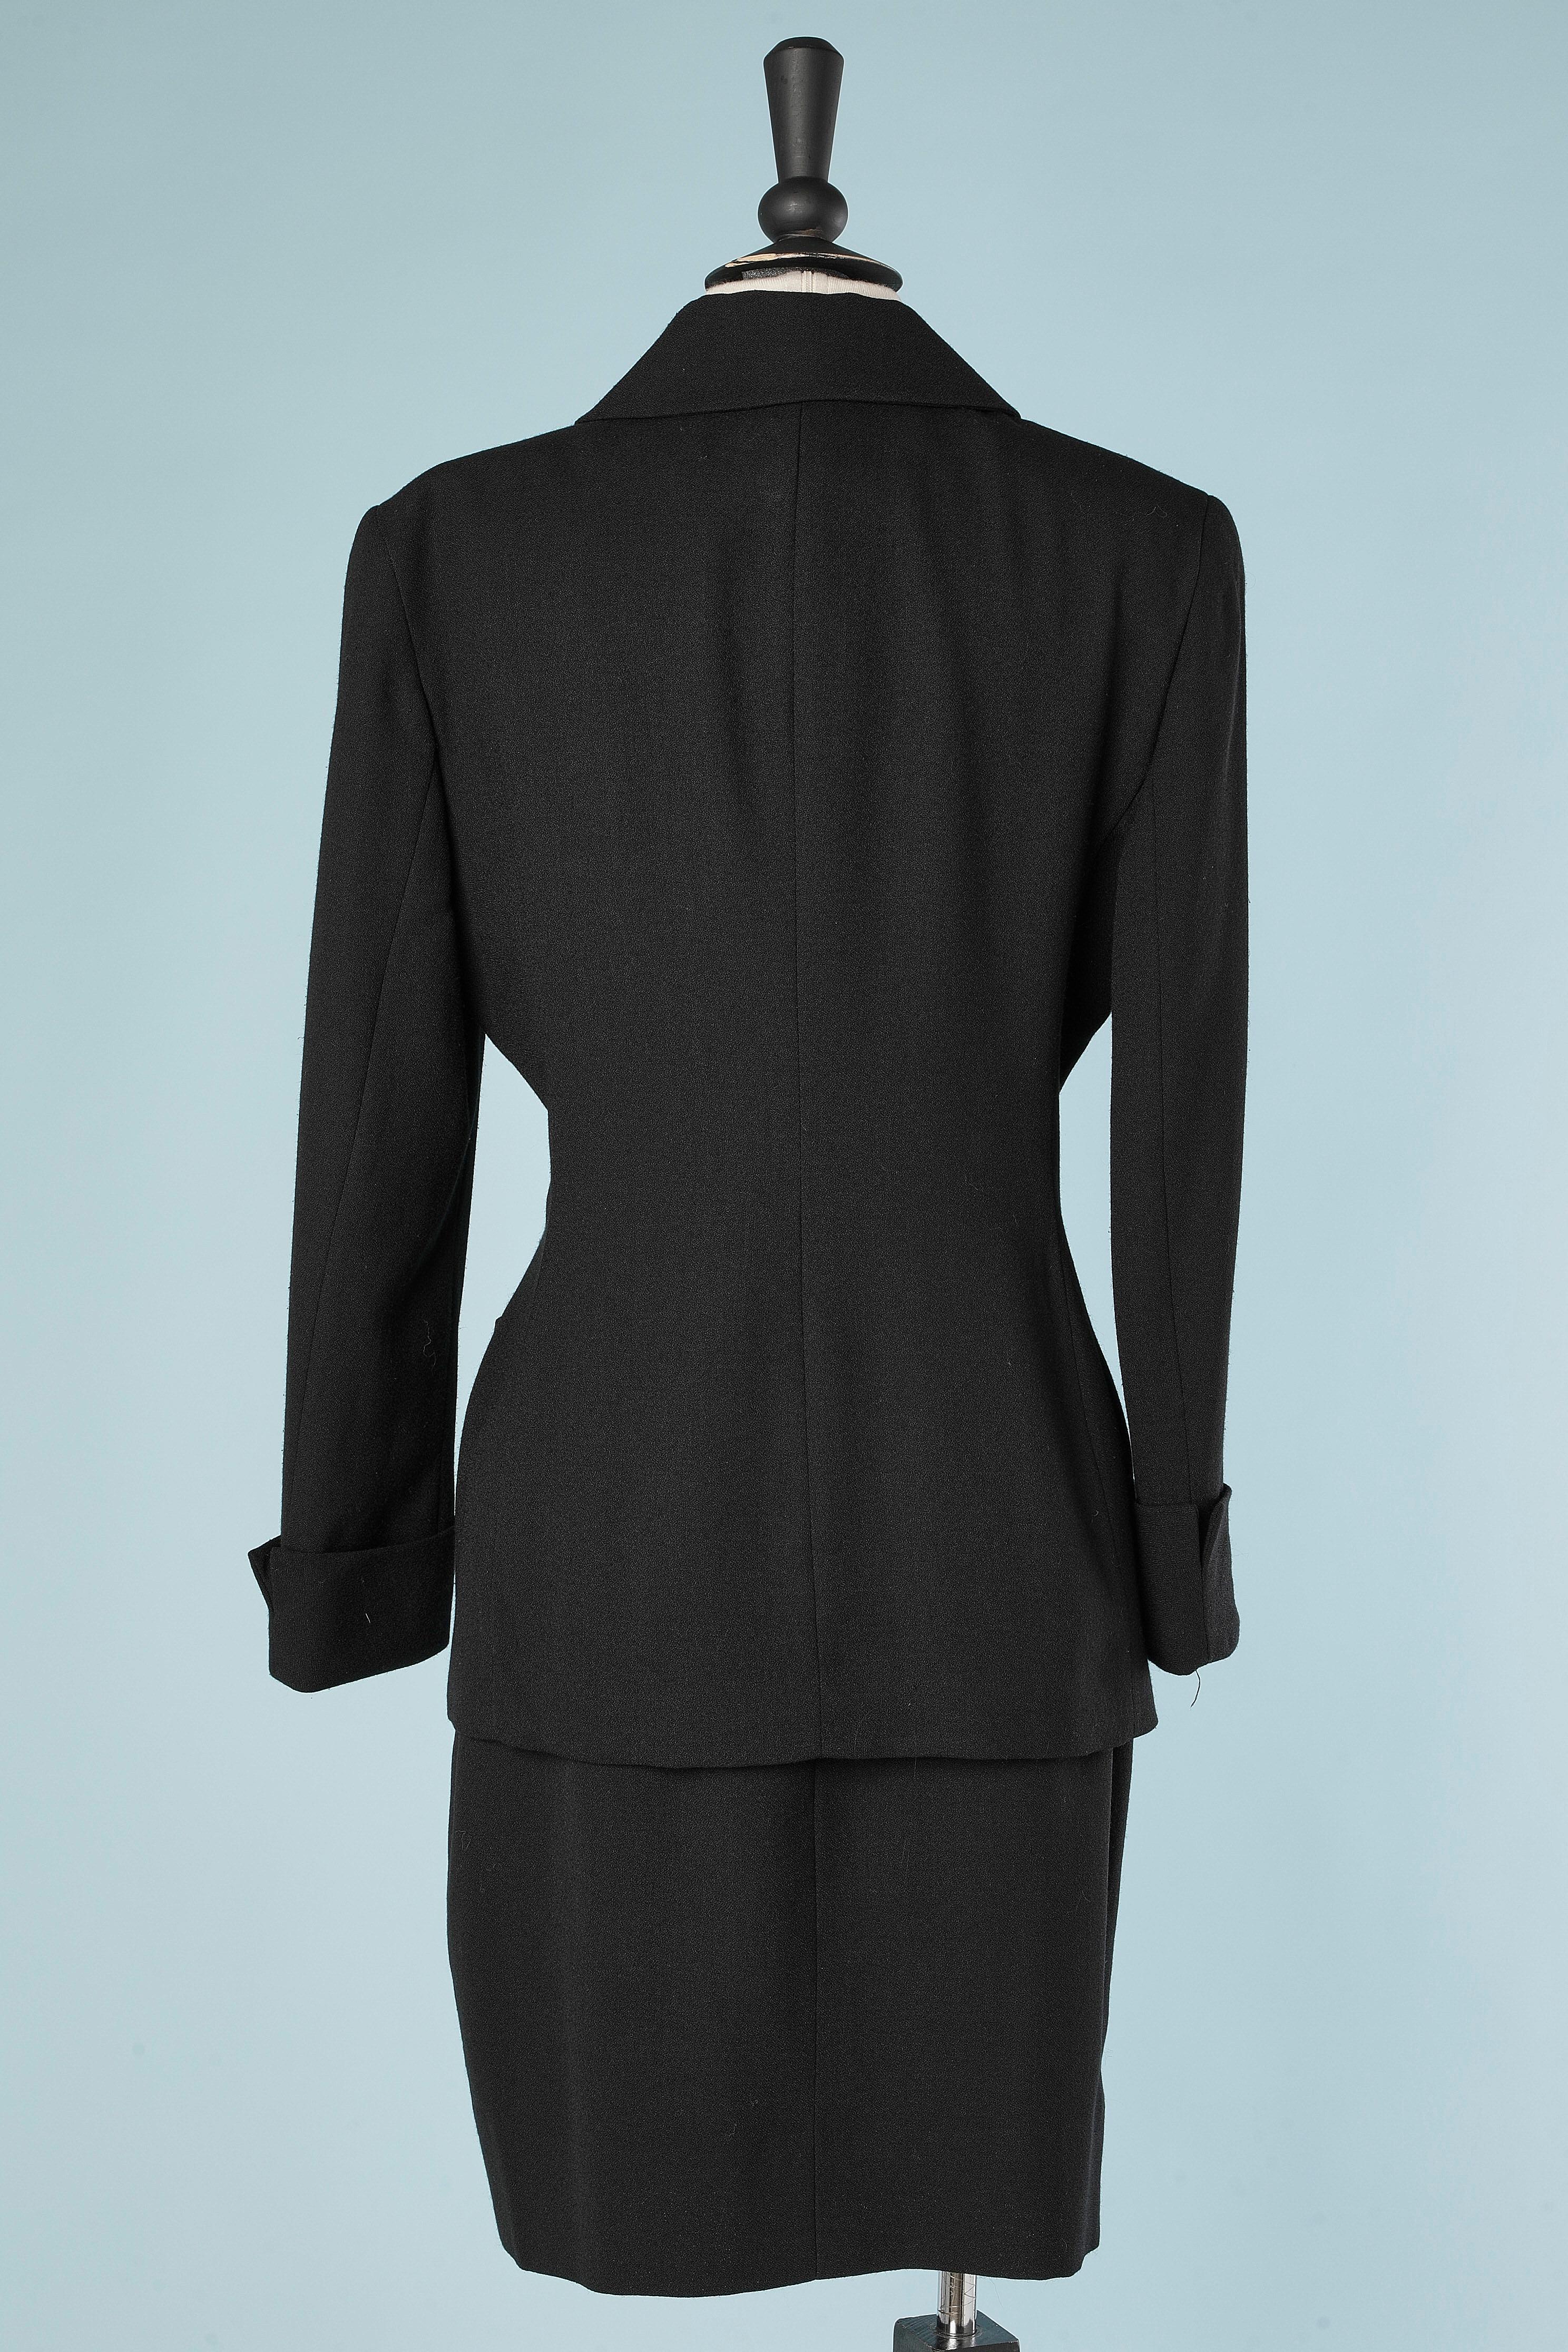 Black crêpe single breasted skirt-suit Christian Dior  For Sale 2